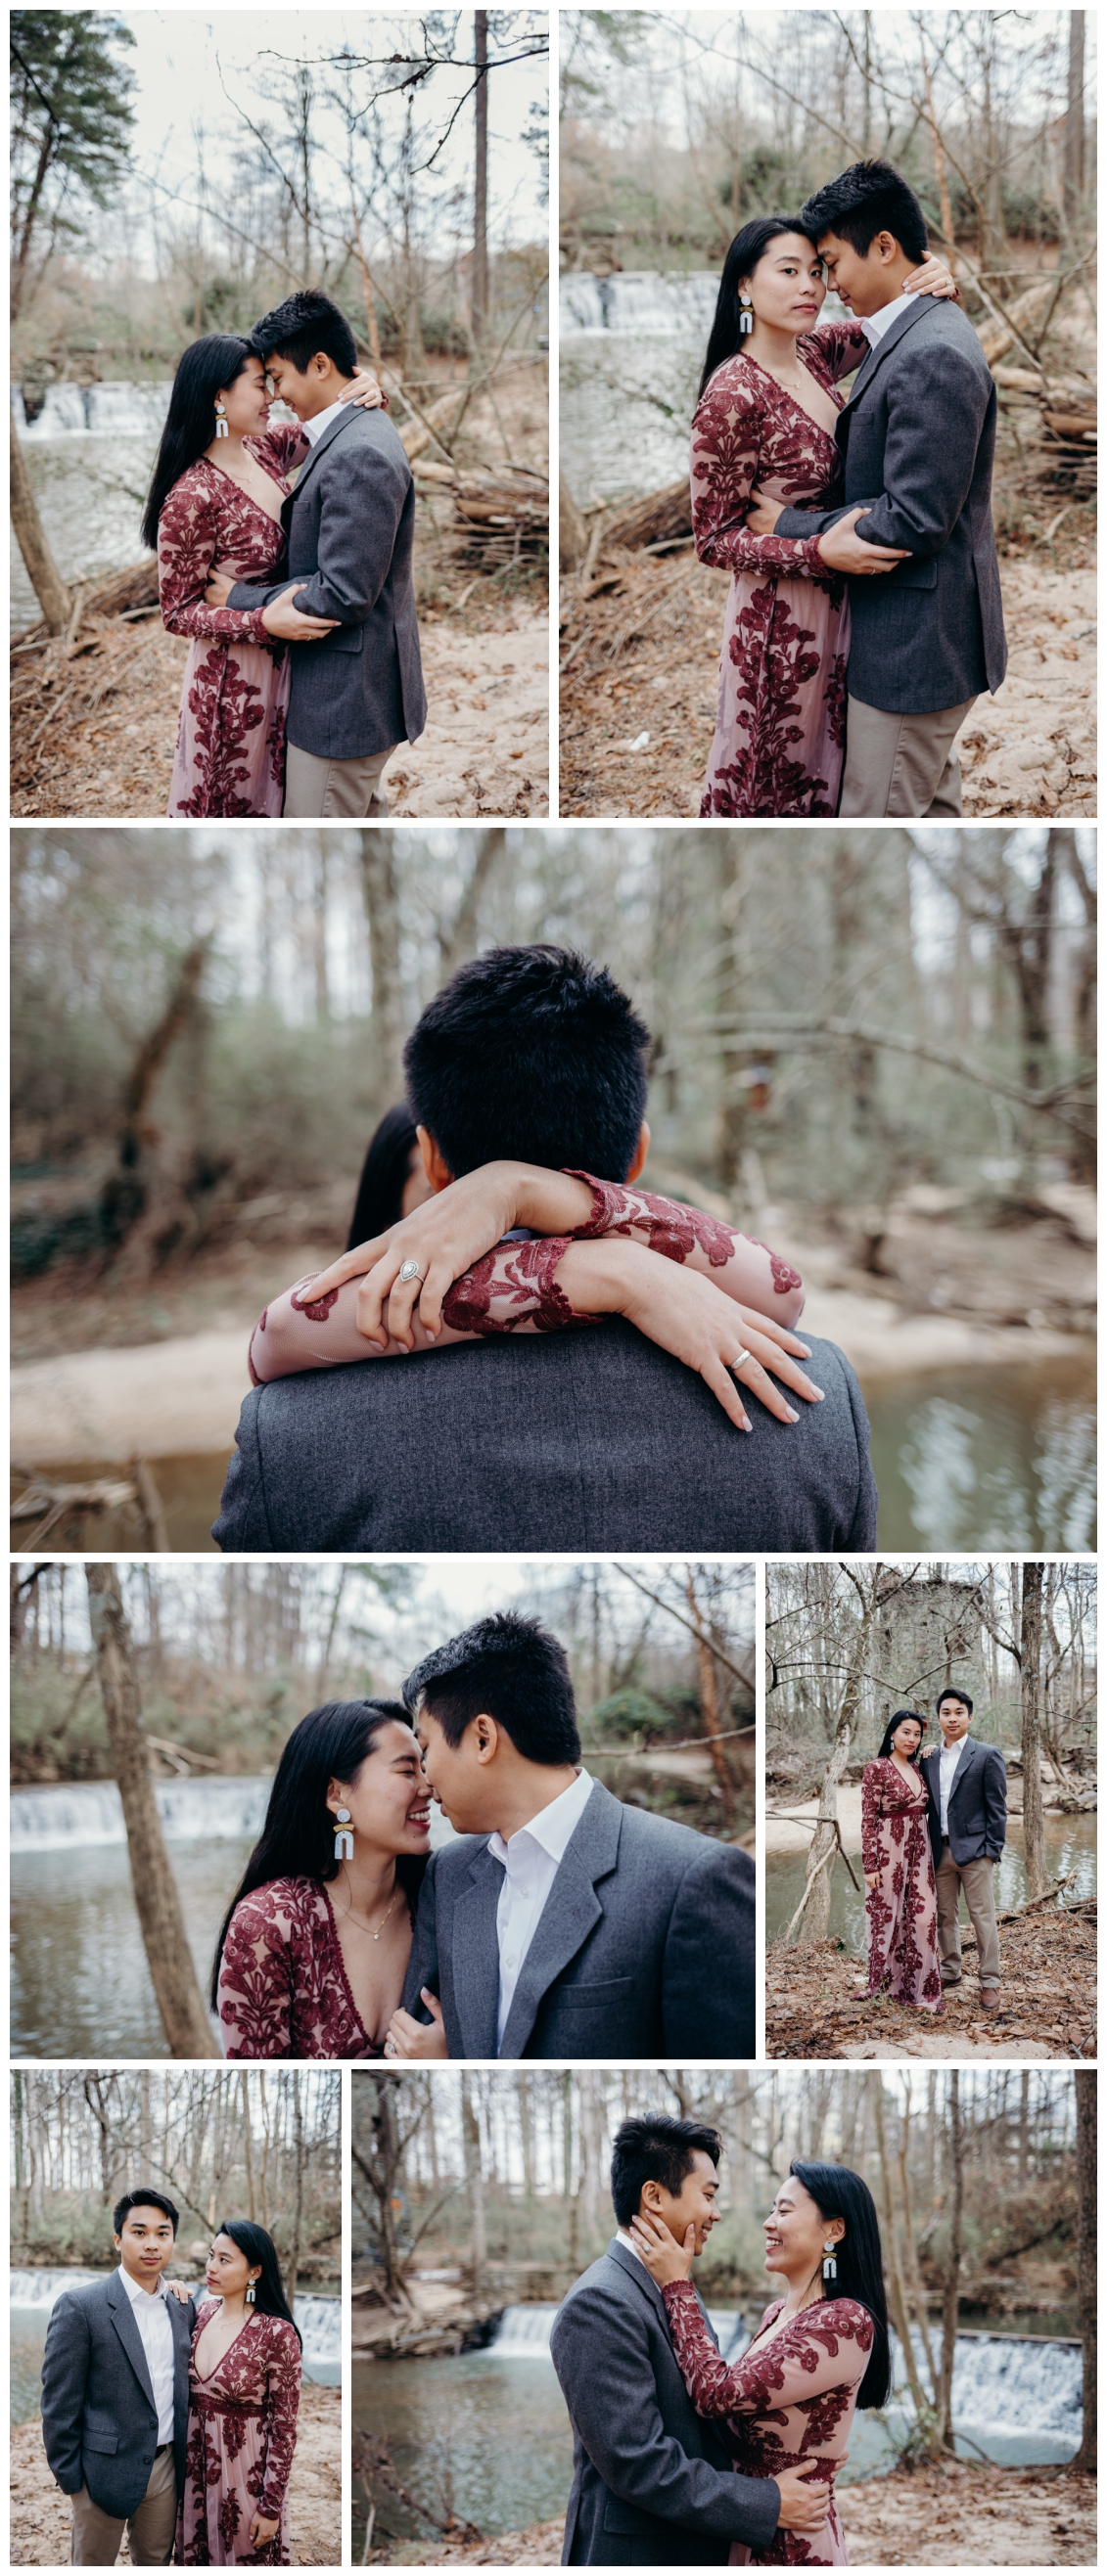 Engagement photos contemporary at Lullwater Preserve